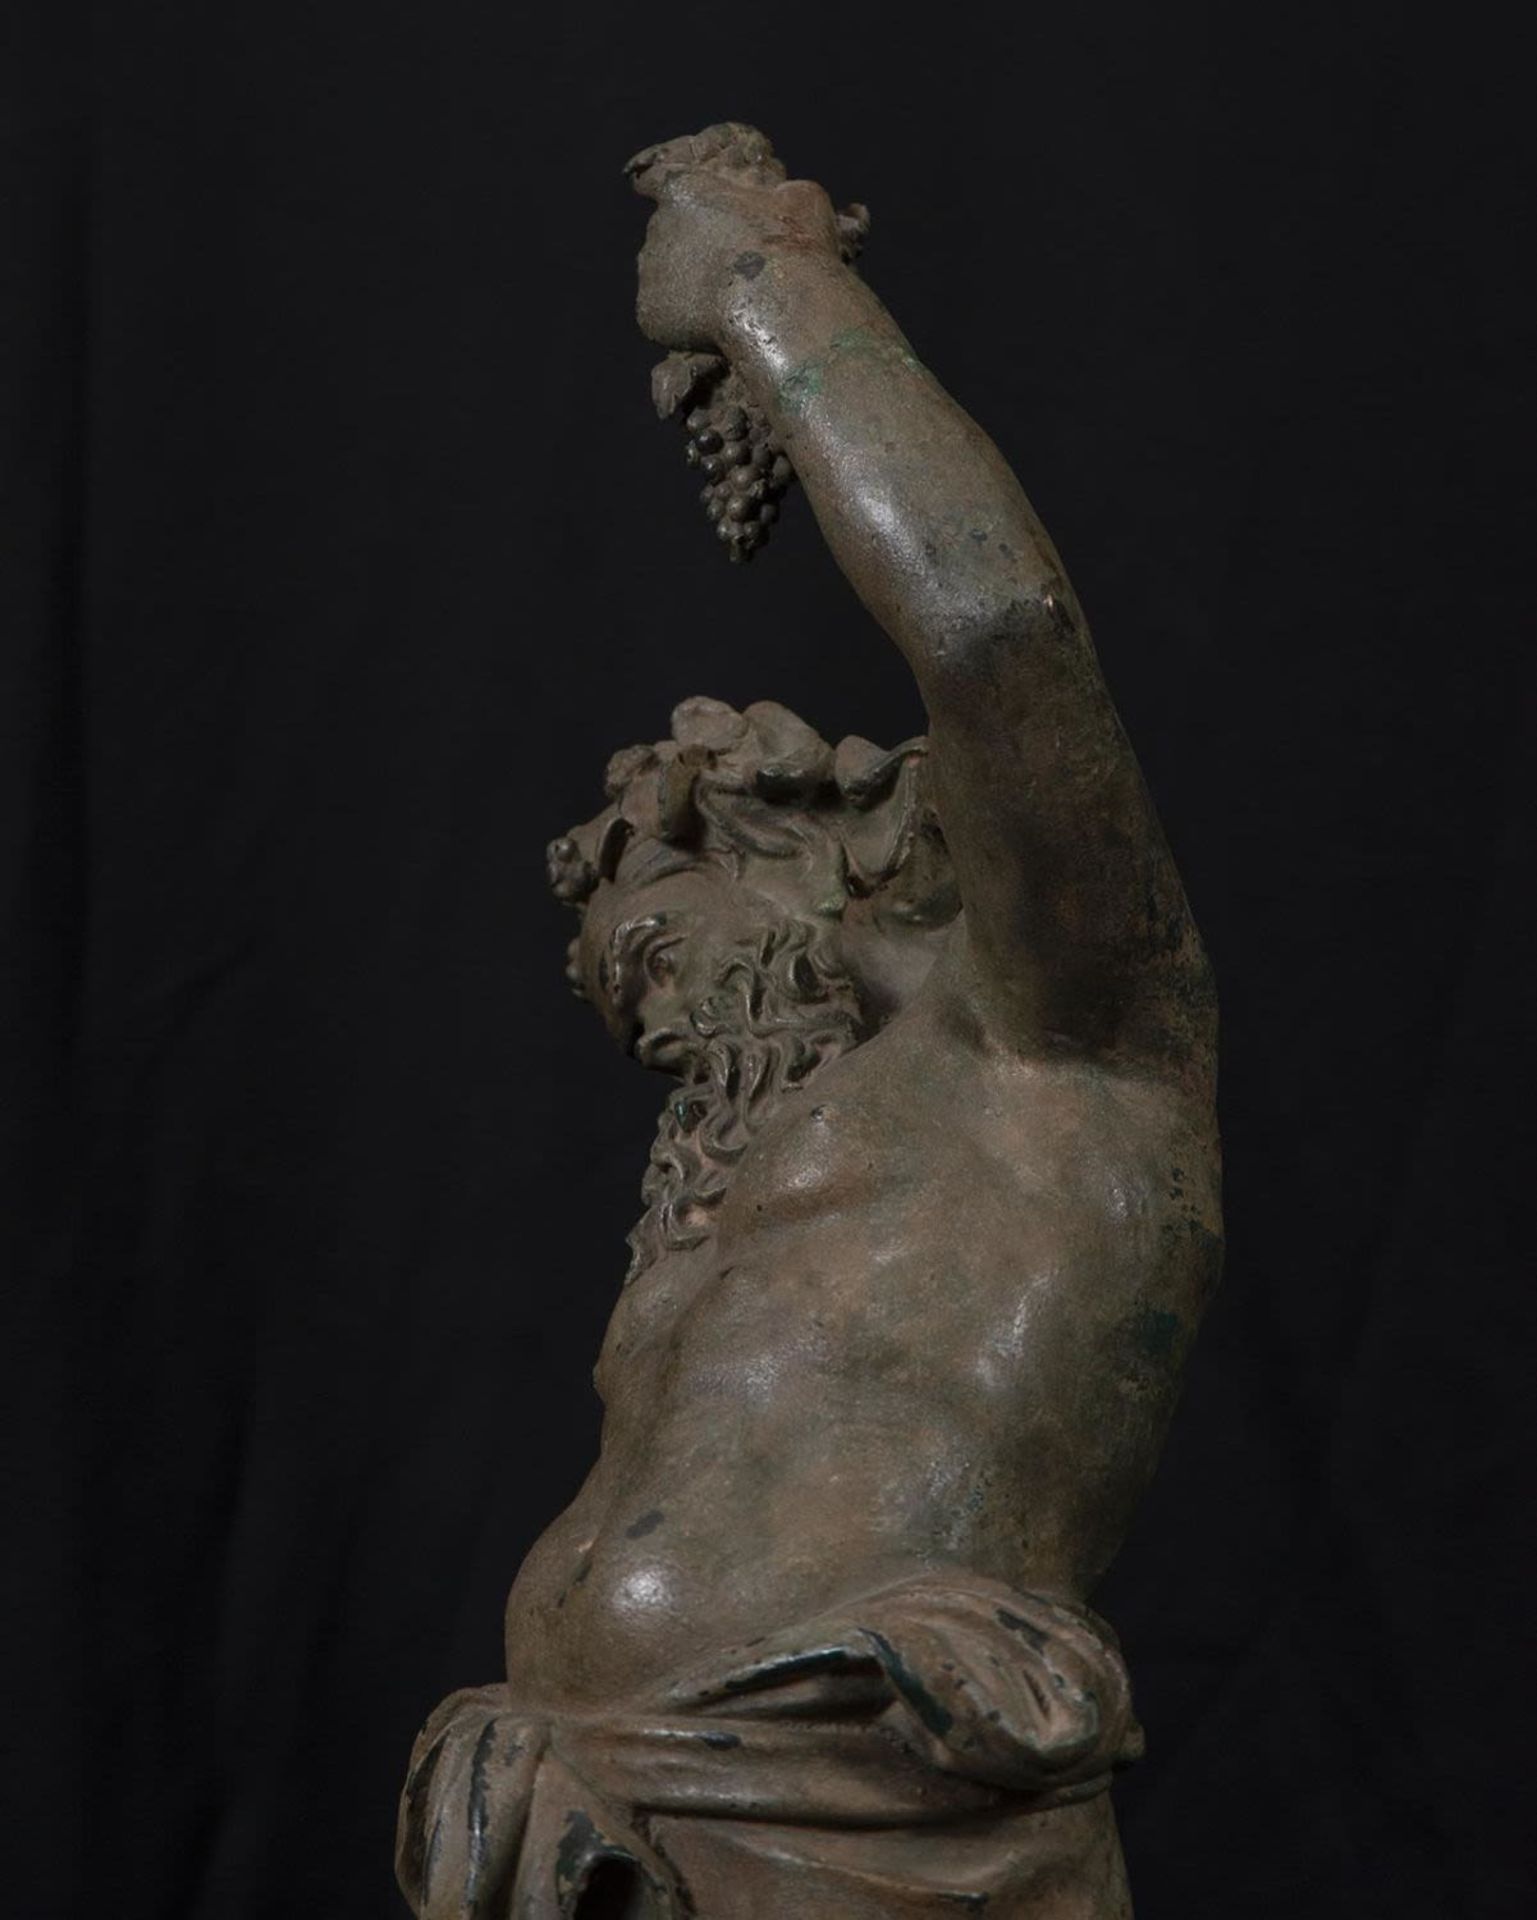 God Bacchus, following models of Classical Rome, Neapolitan foundry from the 19th century - Image 4 of 6